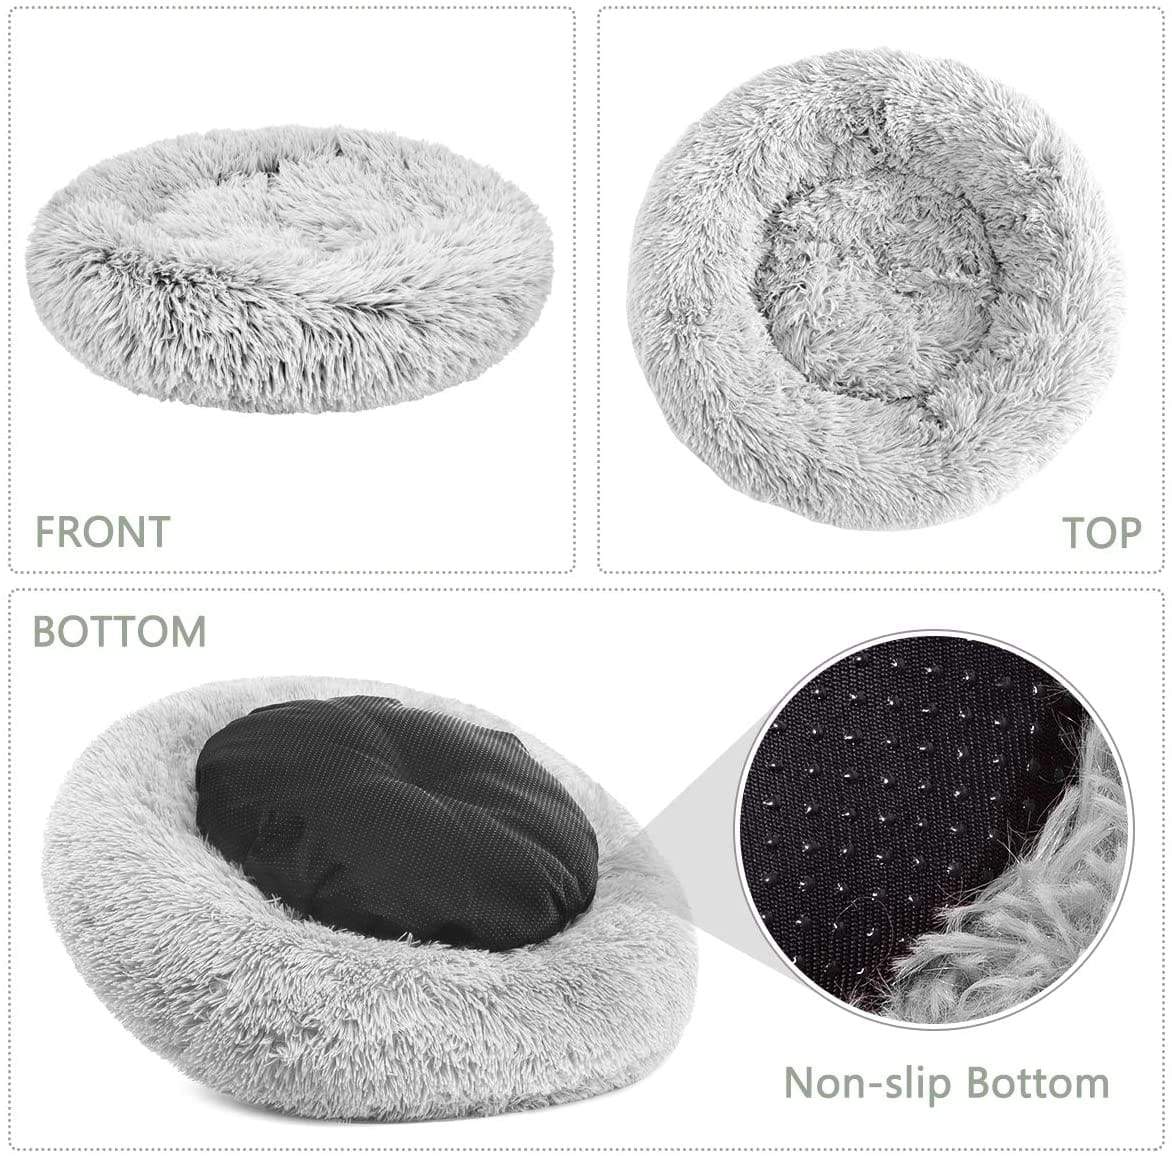 BubbaBed™ | Soothing Calming Dog Bed